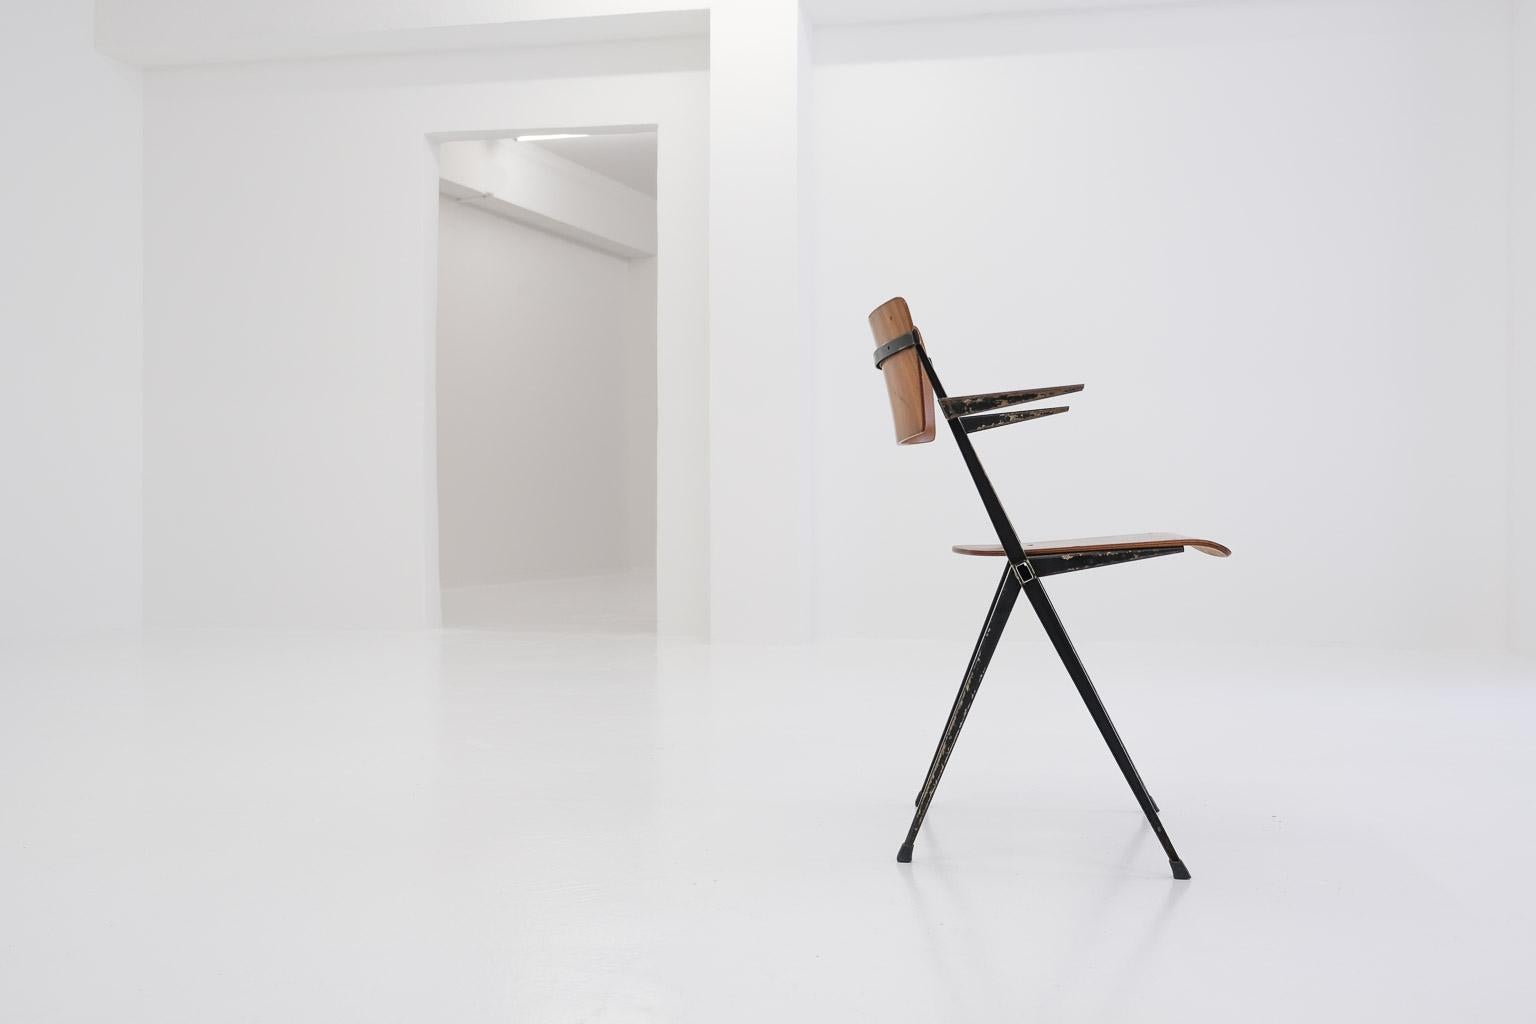 Mid-Century Modern Early Pyramid Arm Chair by Wim Rietveld for Ahrend de Cirkel from Feb. 1964 For Sale